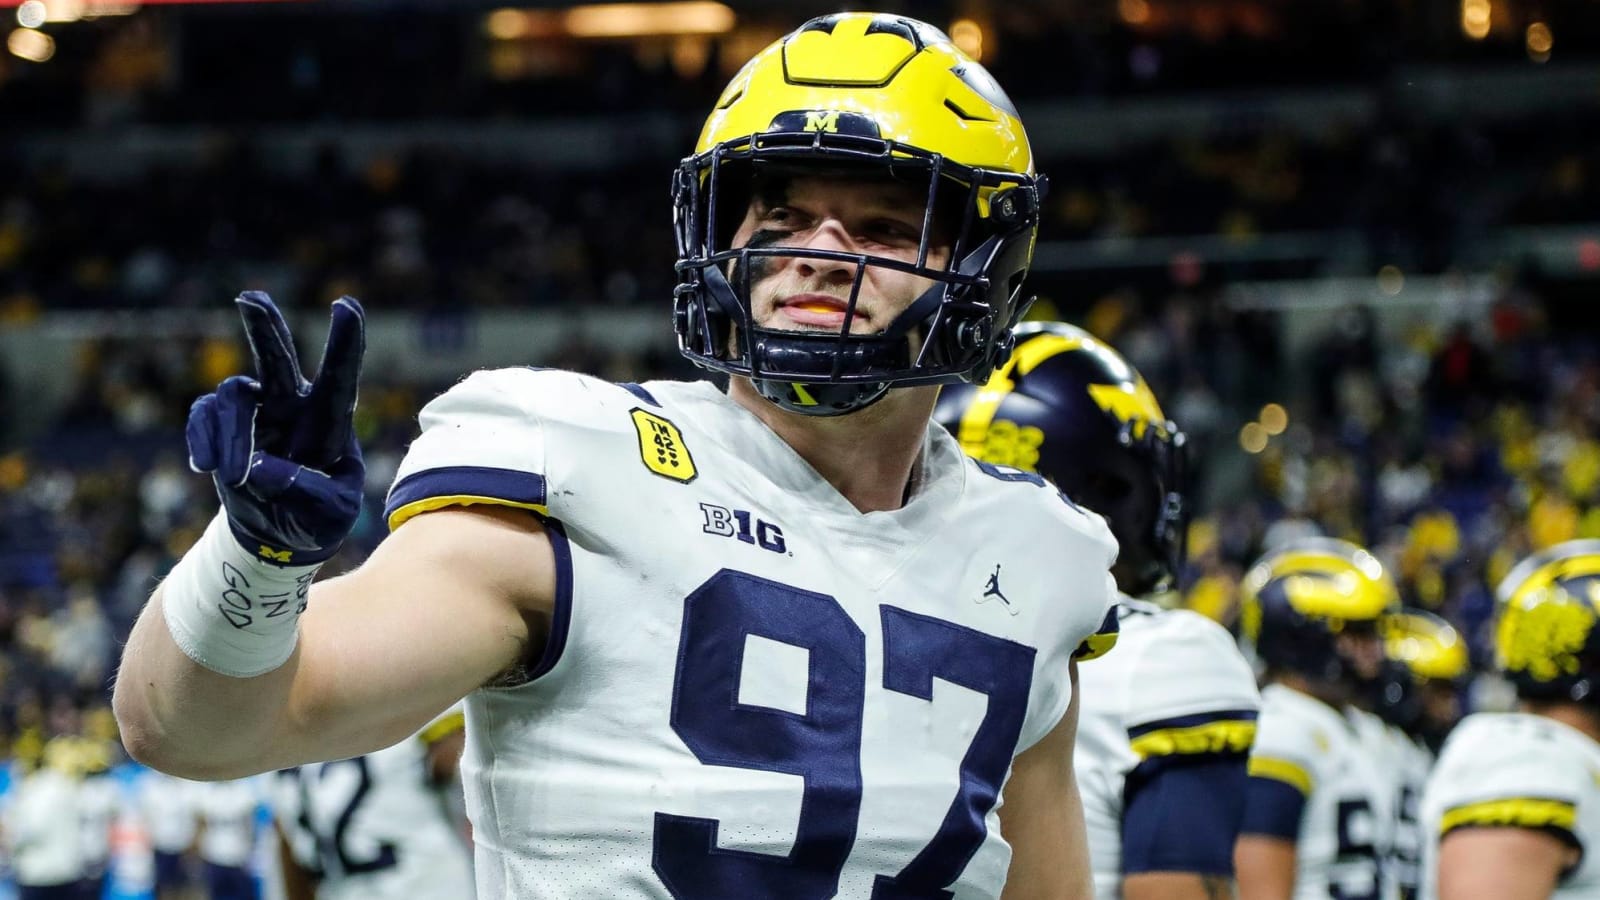 Potential No. 1 pick Aidan Hutchinson talks about possibly playing for Lions